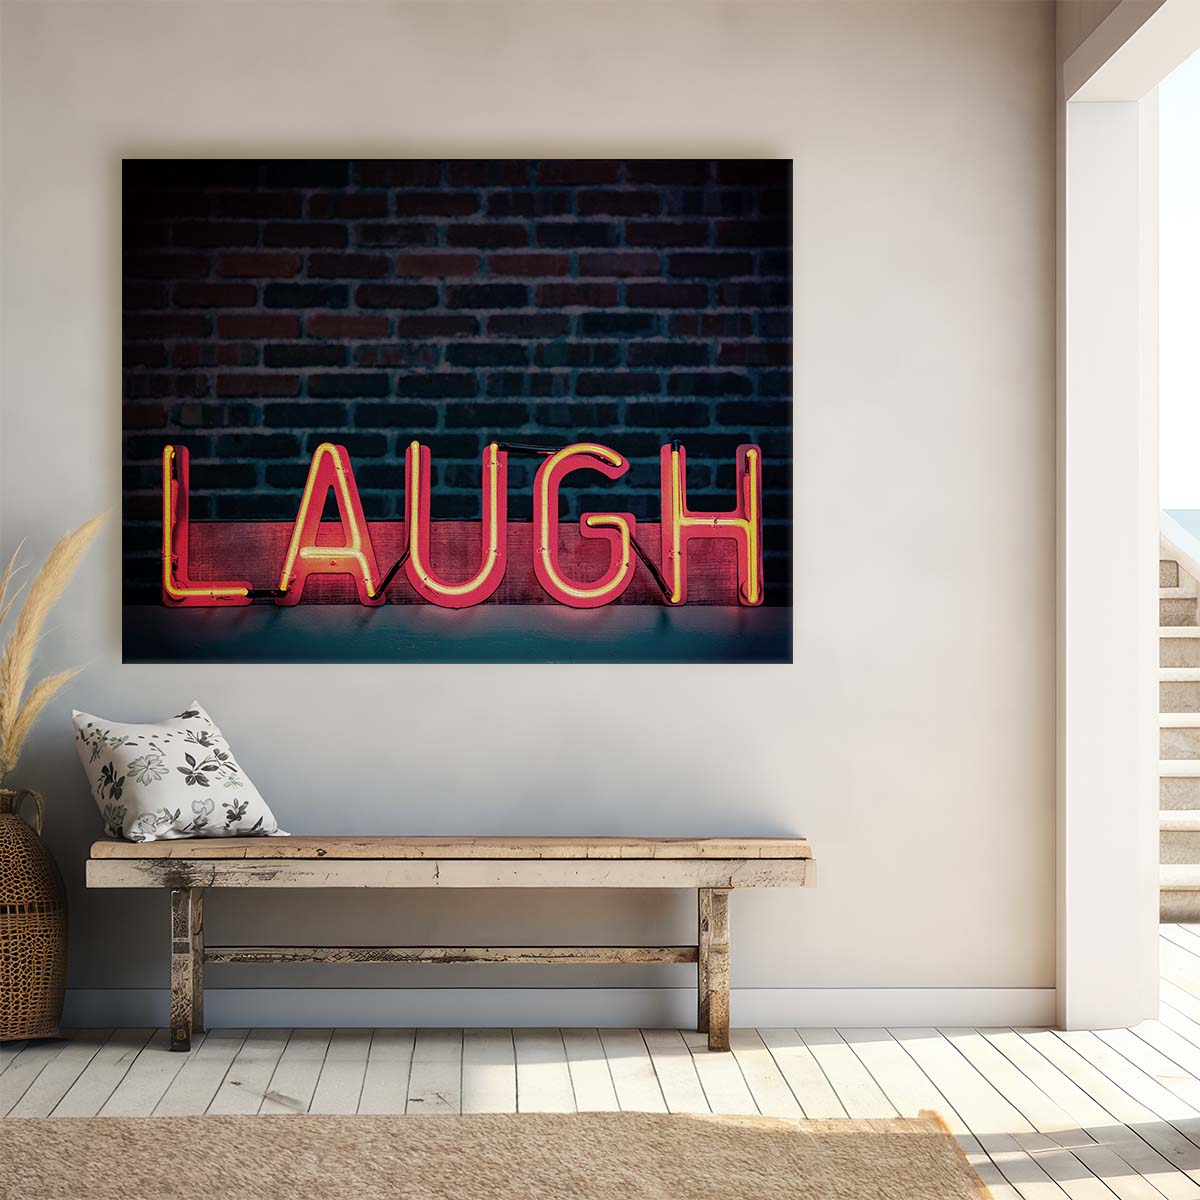 Red Laugh Typography Neon Sign Brick Wall Art by Luxuriance Designs. Made in USA.